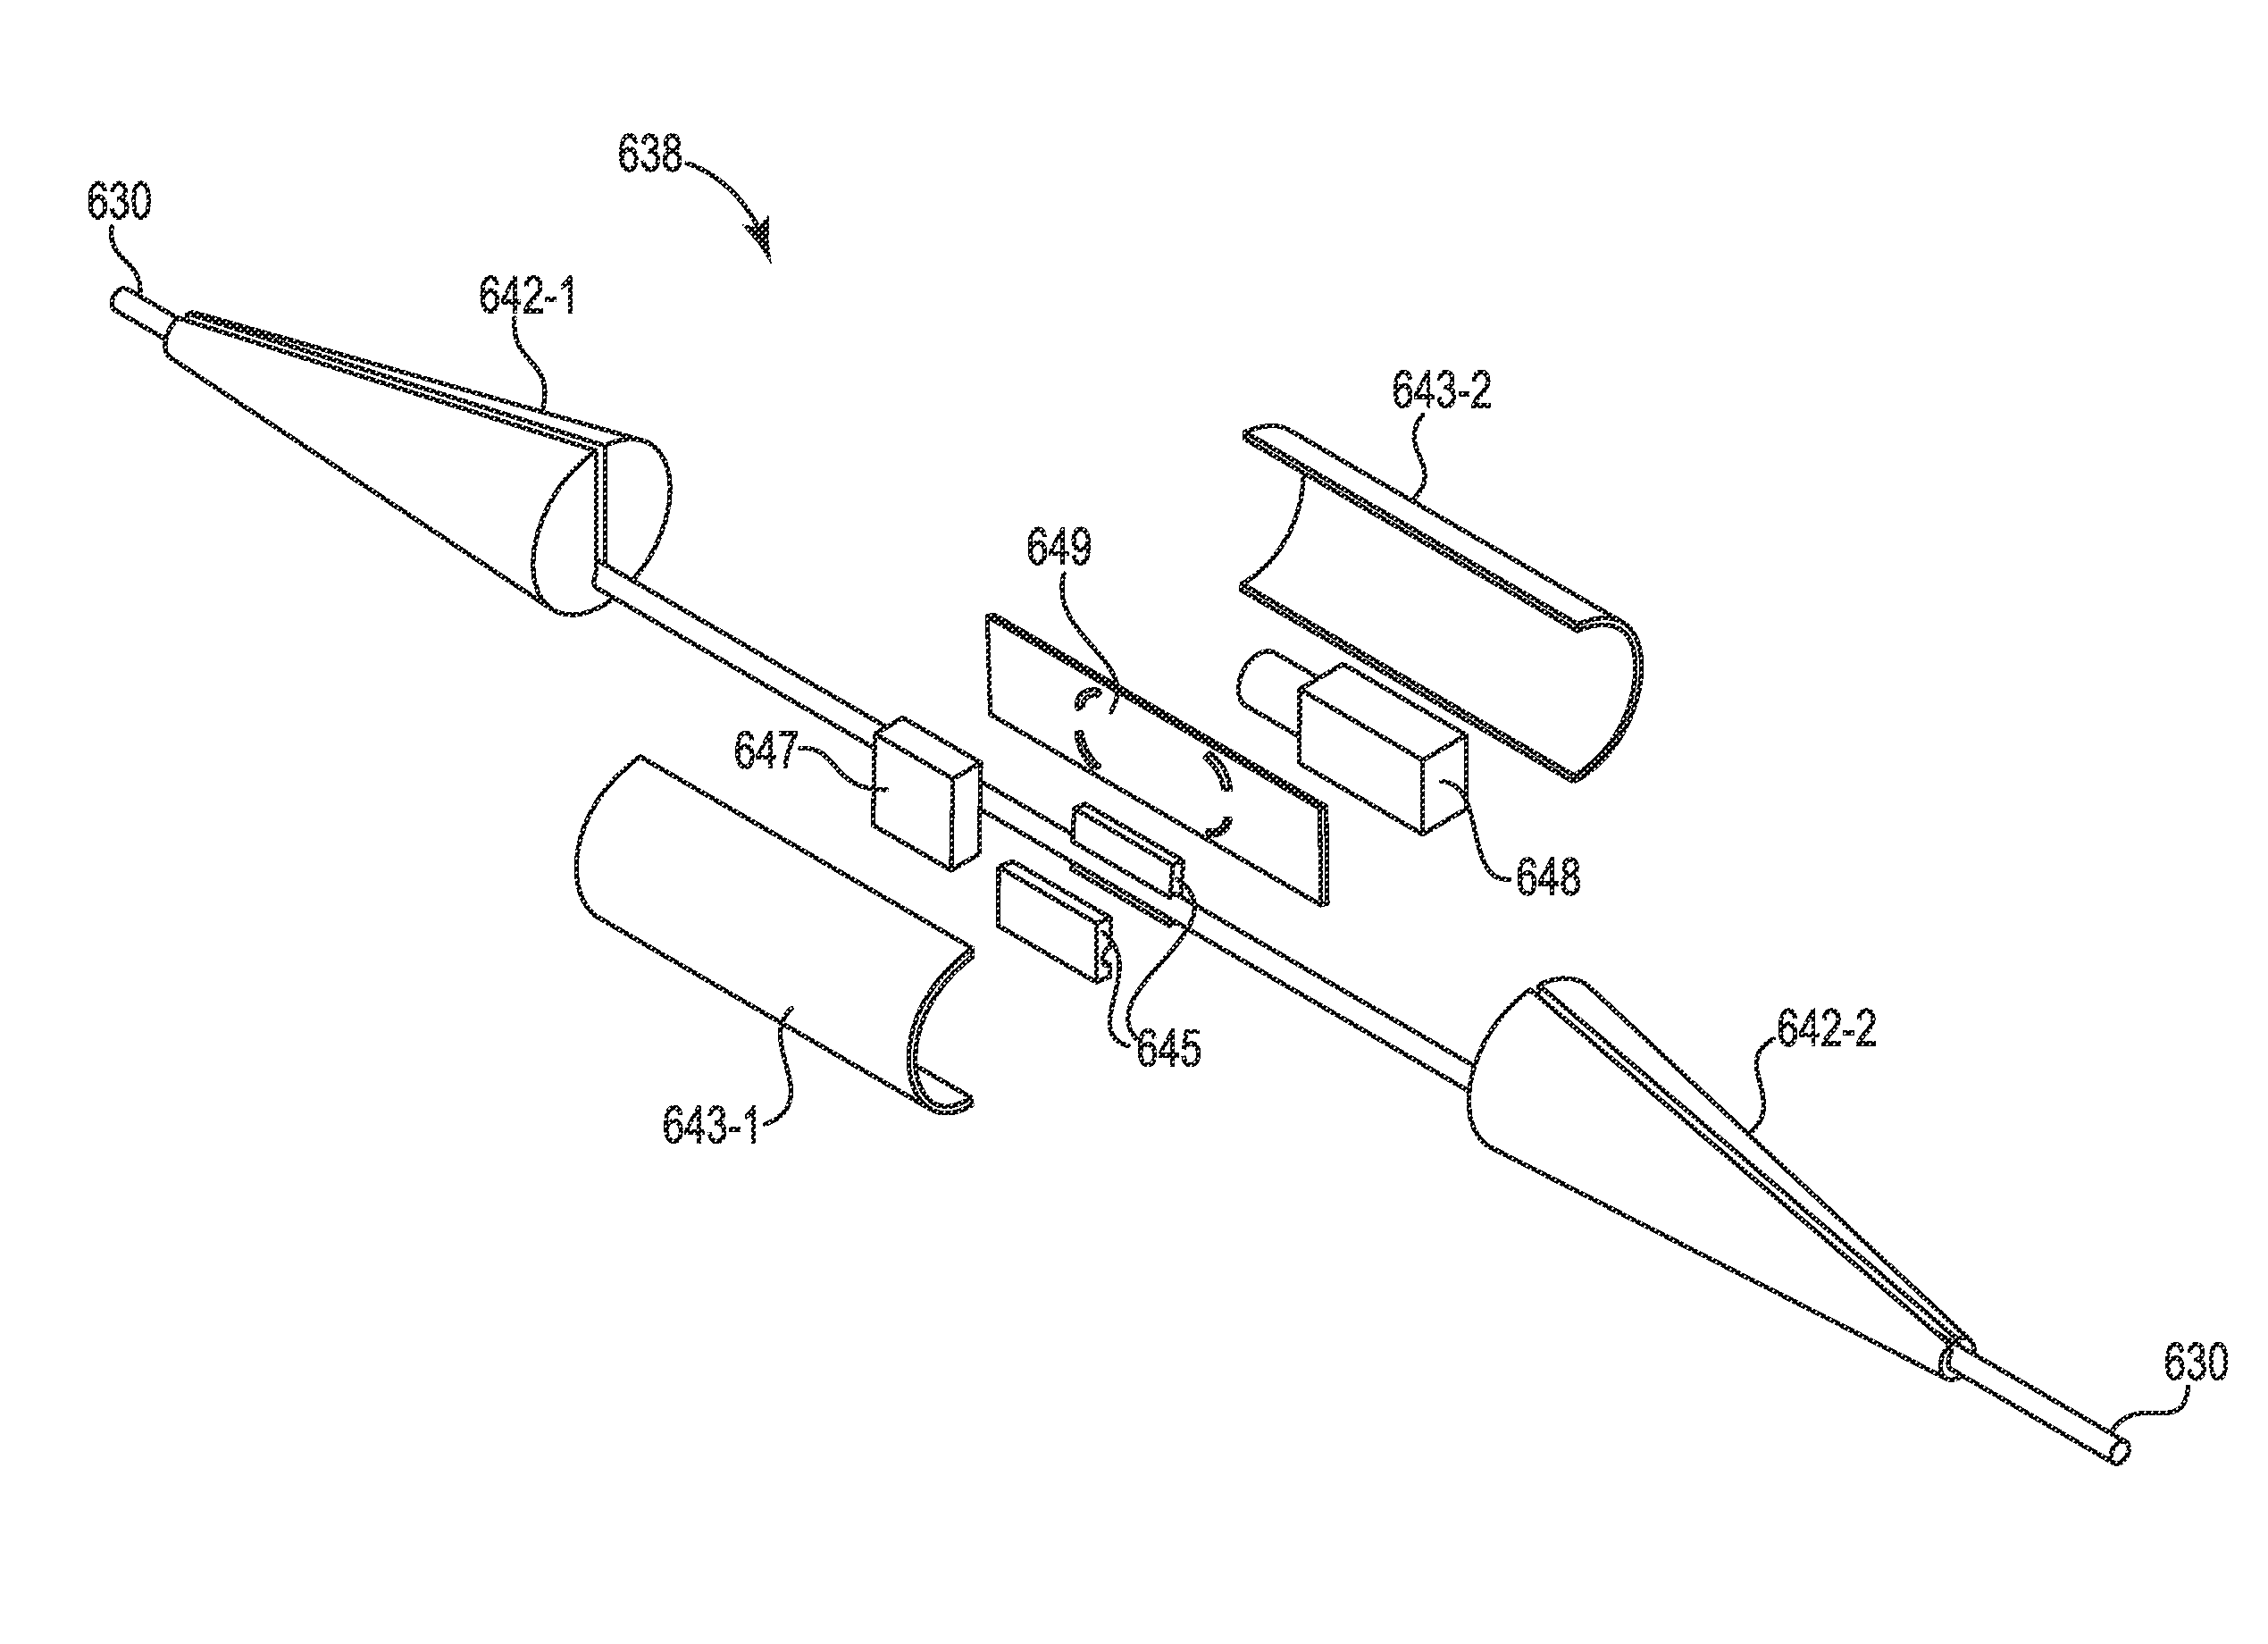 Floodable Optical Apparatus, Methods and Systems